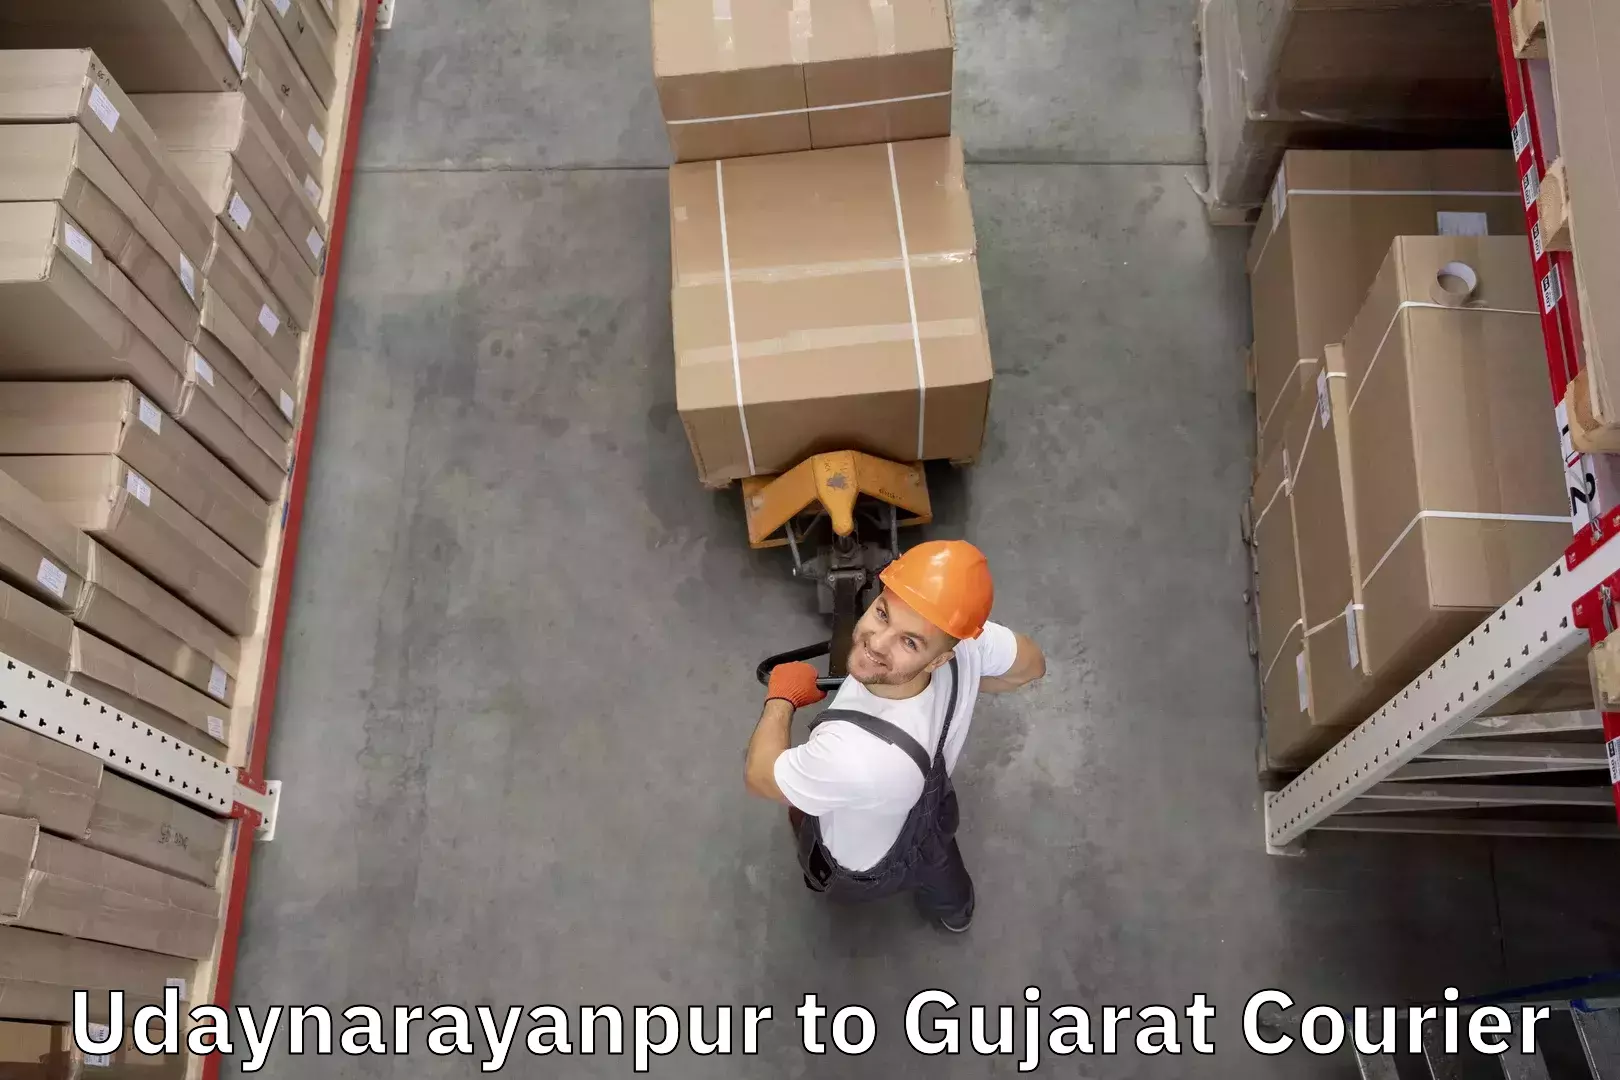 Personal effects shipping in Udaynarayanpur to Sanand